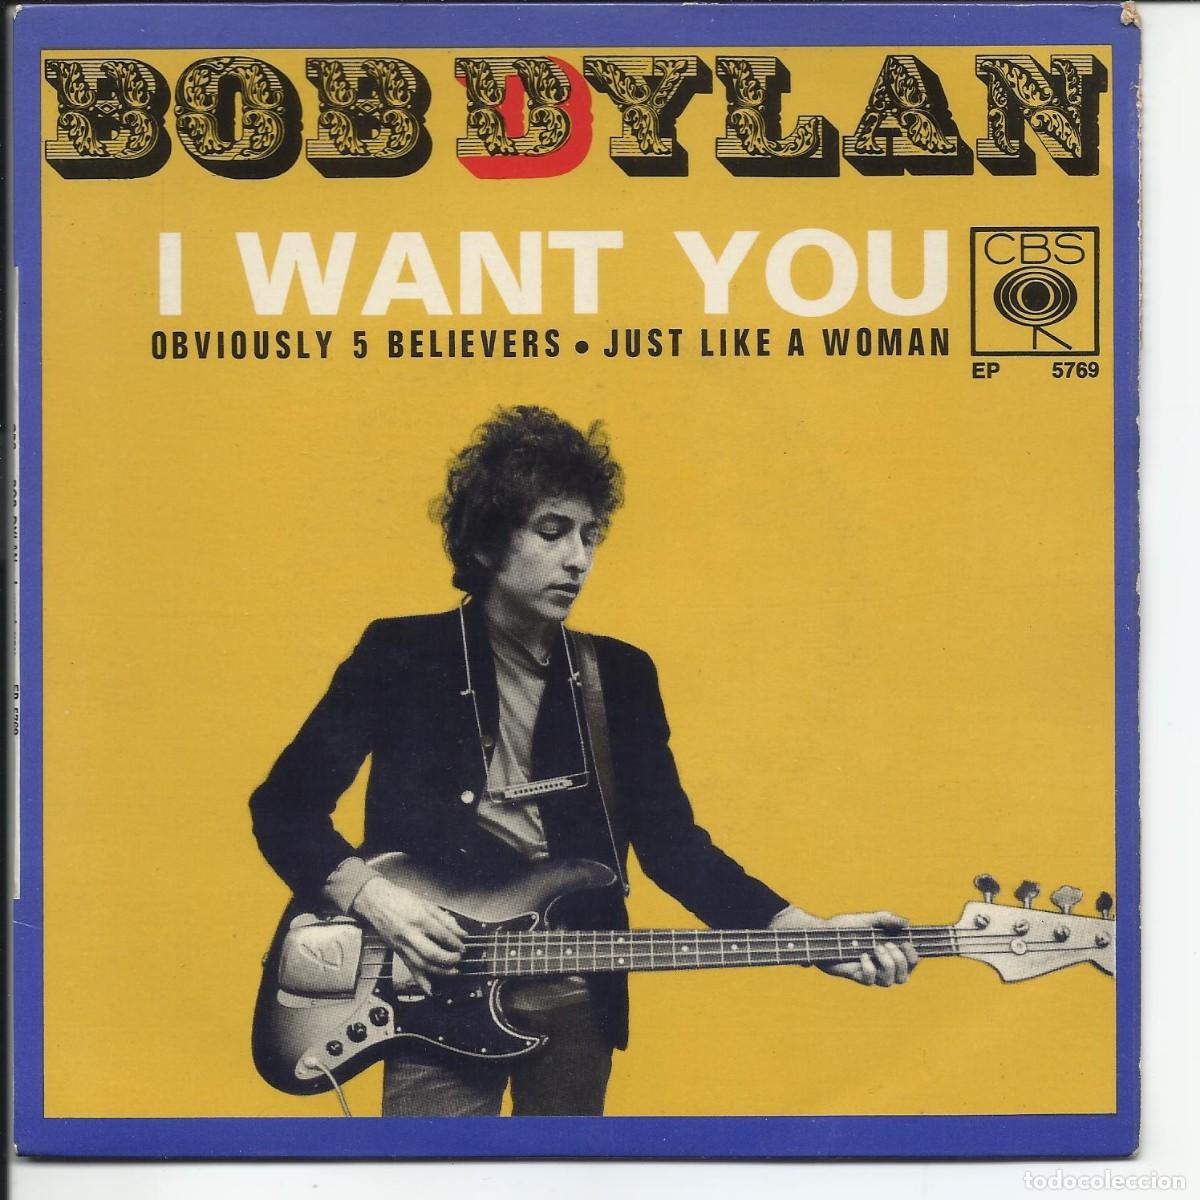 bob dylan .-i want you single cbs ‎ep 5769 fran Buy EP vinyl records of  Pop-Rock International of the 50s and 60s on todocoleccion